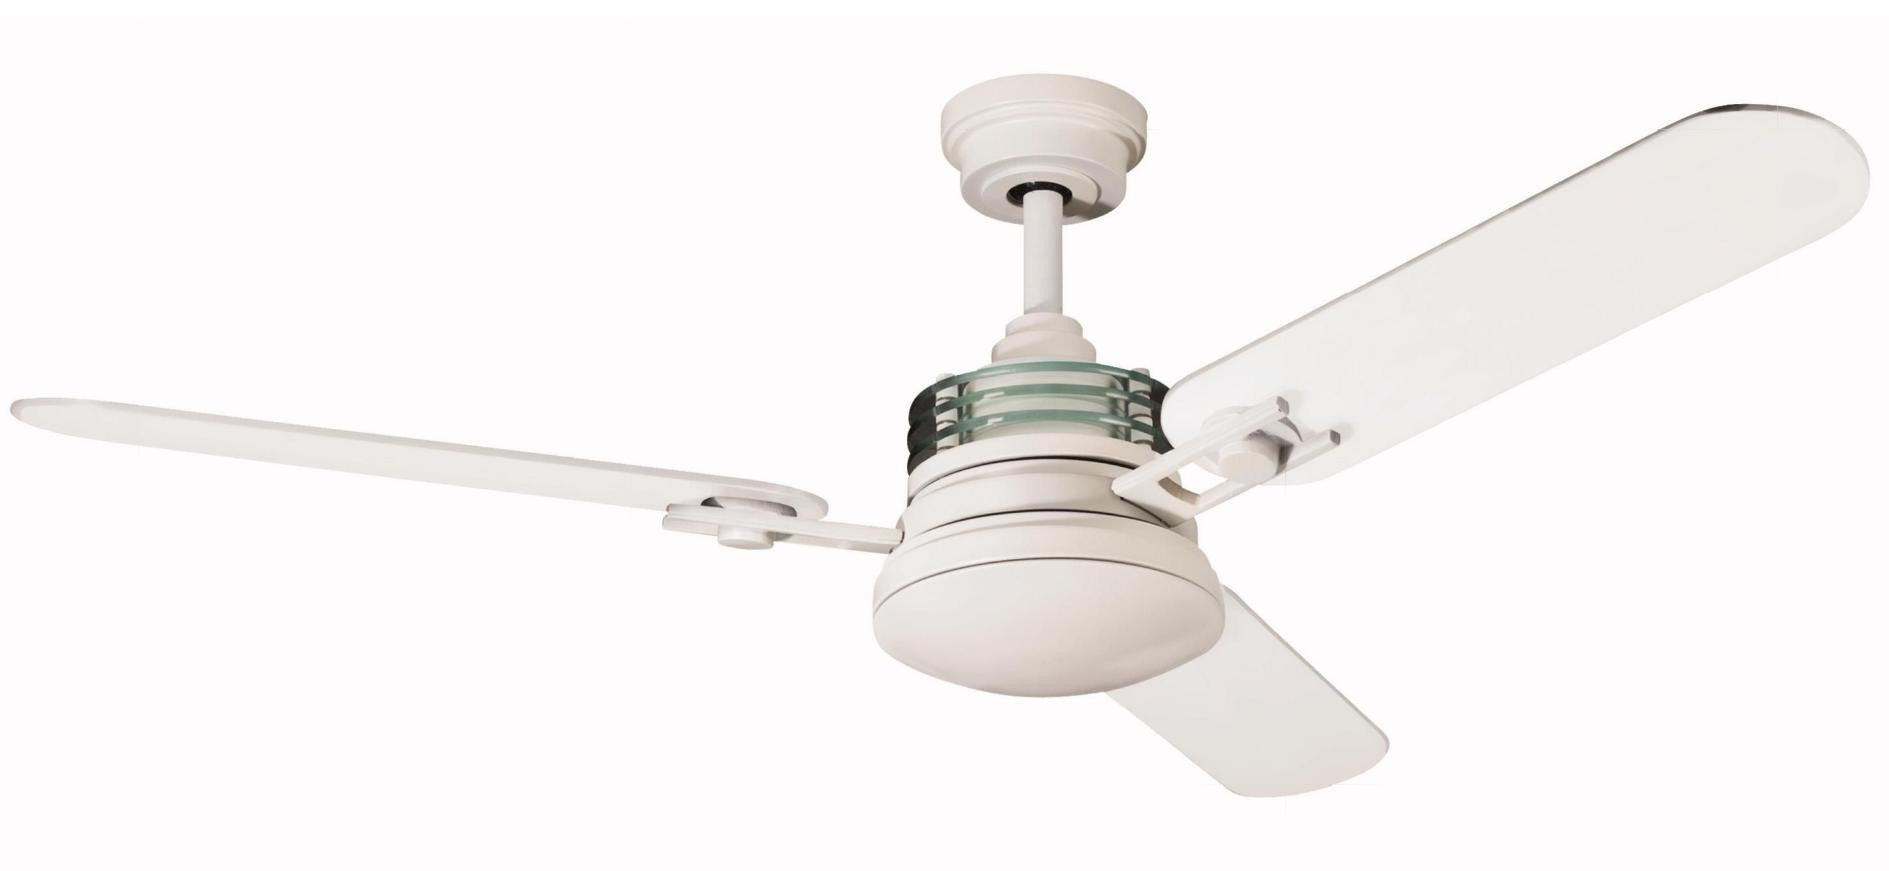 Kichler Lighting 300009 SNW Structures Ceiling Fan in Satin Natural White Finish